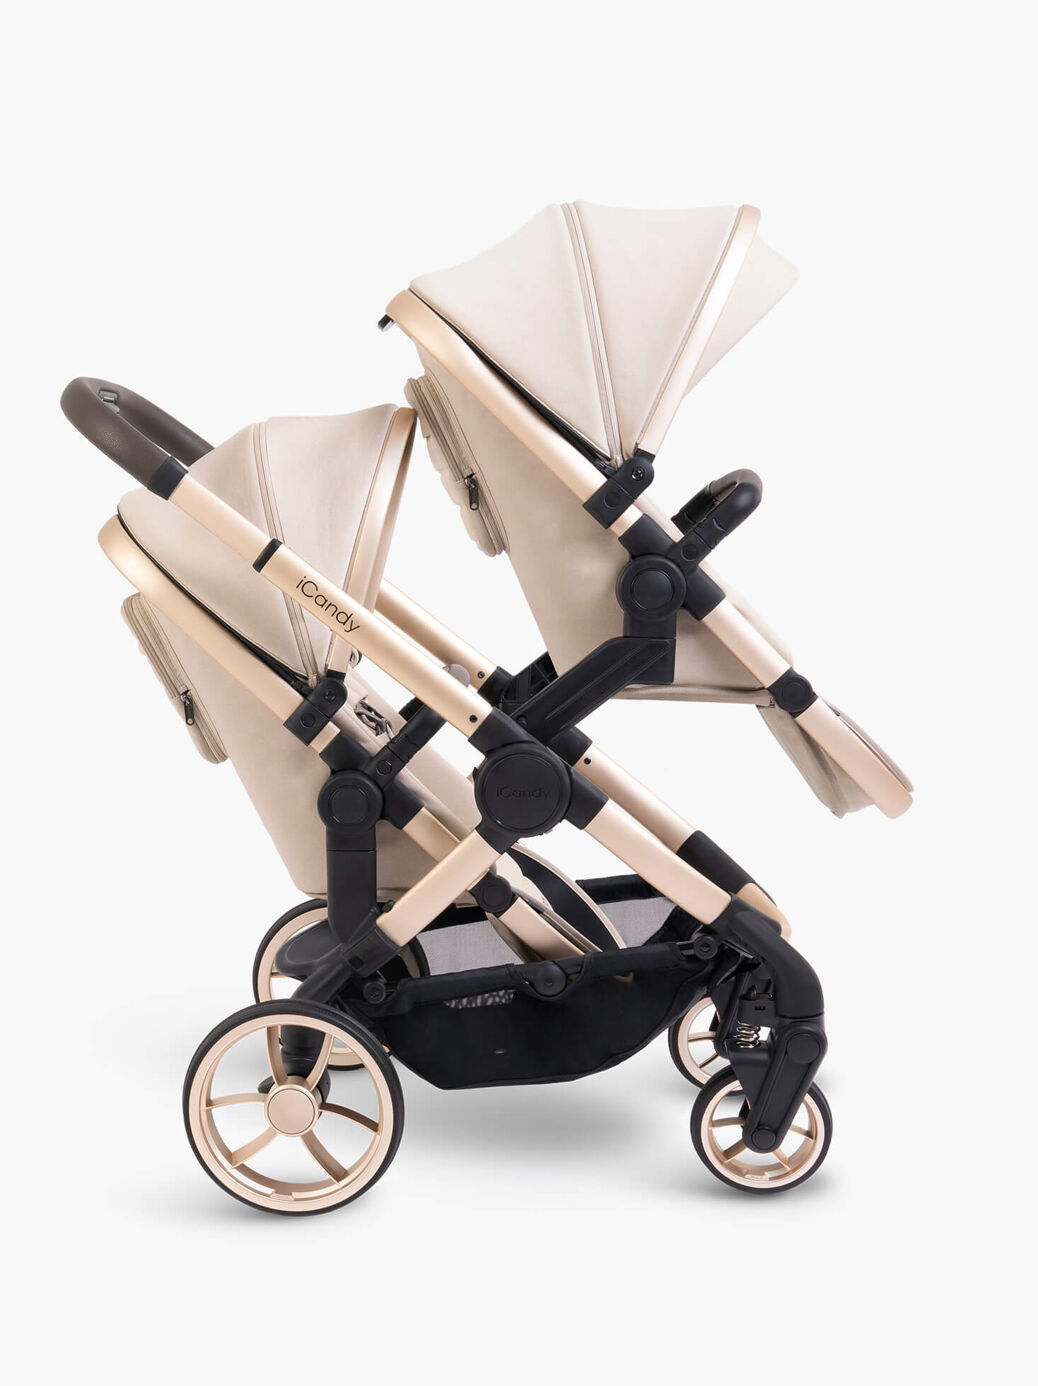 Peach 7 Double Pushchair & Carrycot in Biscotti - iCandy